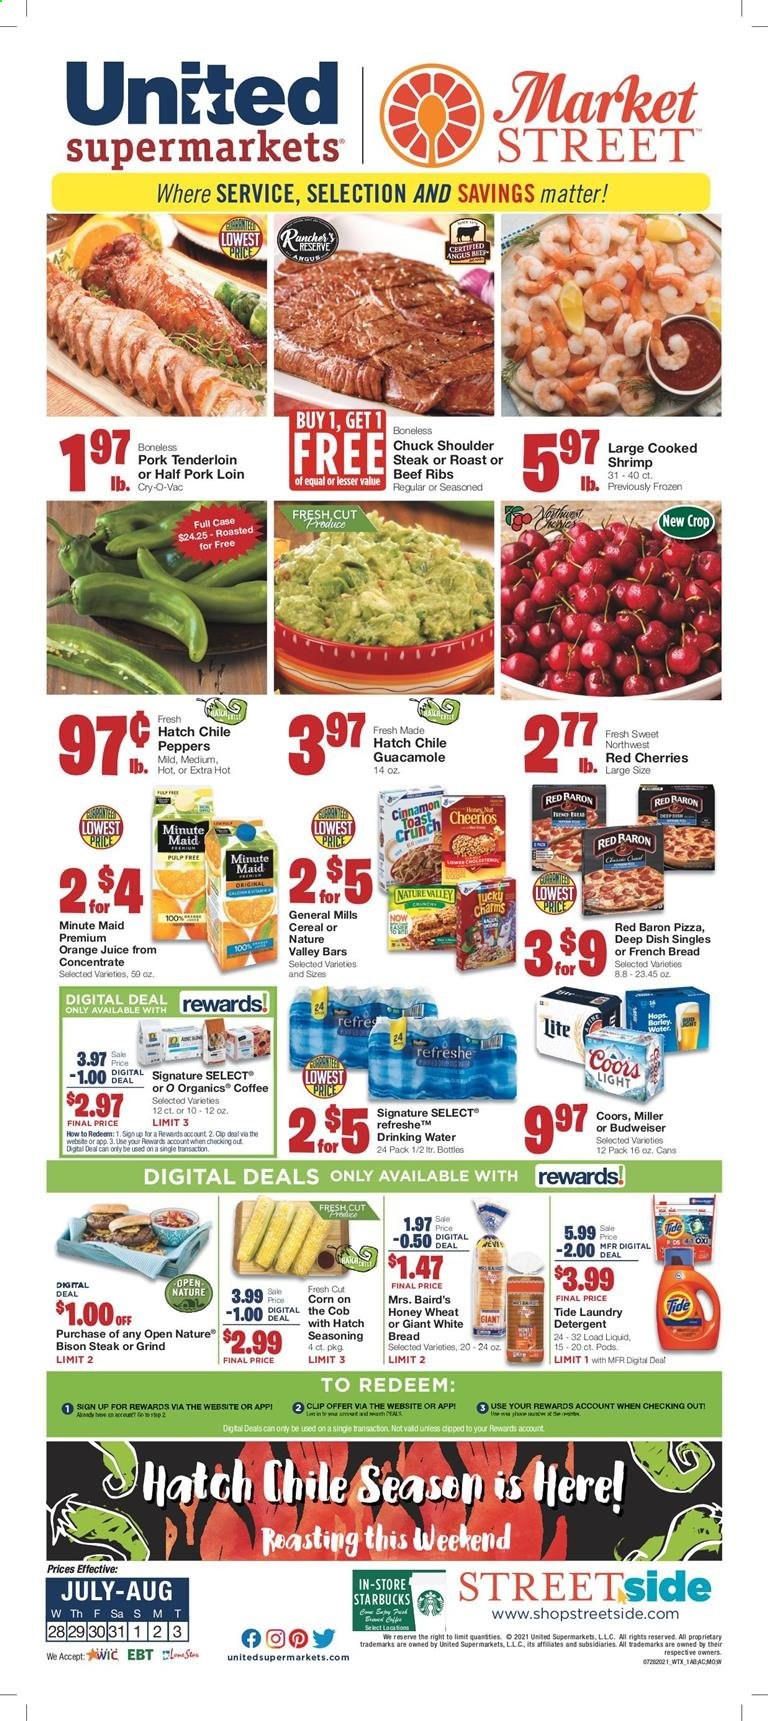 thumbnail - United Supermarkets Flyer - 07/28/2021 - 08/03/2021 - Sales products - Budweiser, Coors, bread, white bread, french bread, corn, peppers, cherries, beef meat, beef ribs, steak, bison meat, pork loin, pork meat, pork tenderloin, shrimps, pizza, guacamole, Nature Fresh, Red Baron, cereals, Cheerios, Nature Valley, spice, cinnamon, orange juice, juice, fruit punch, coffee, Starbucks, beer, Miller, detergent, Tide, laundry detergent. Page 1.